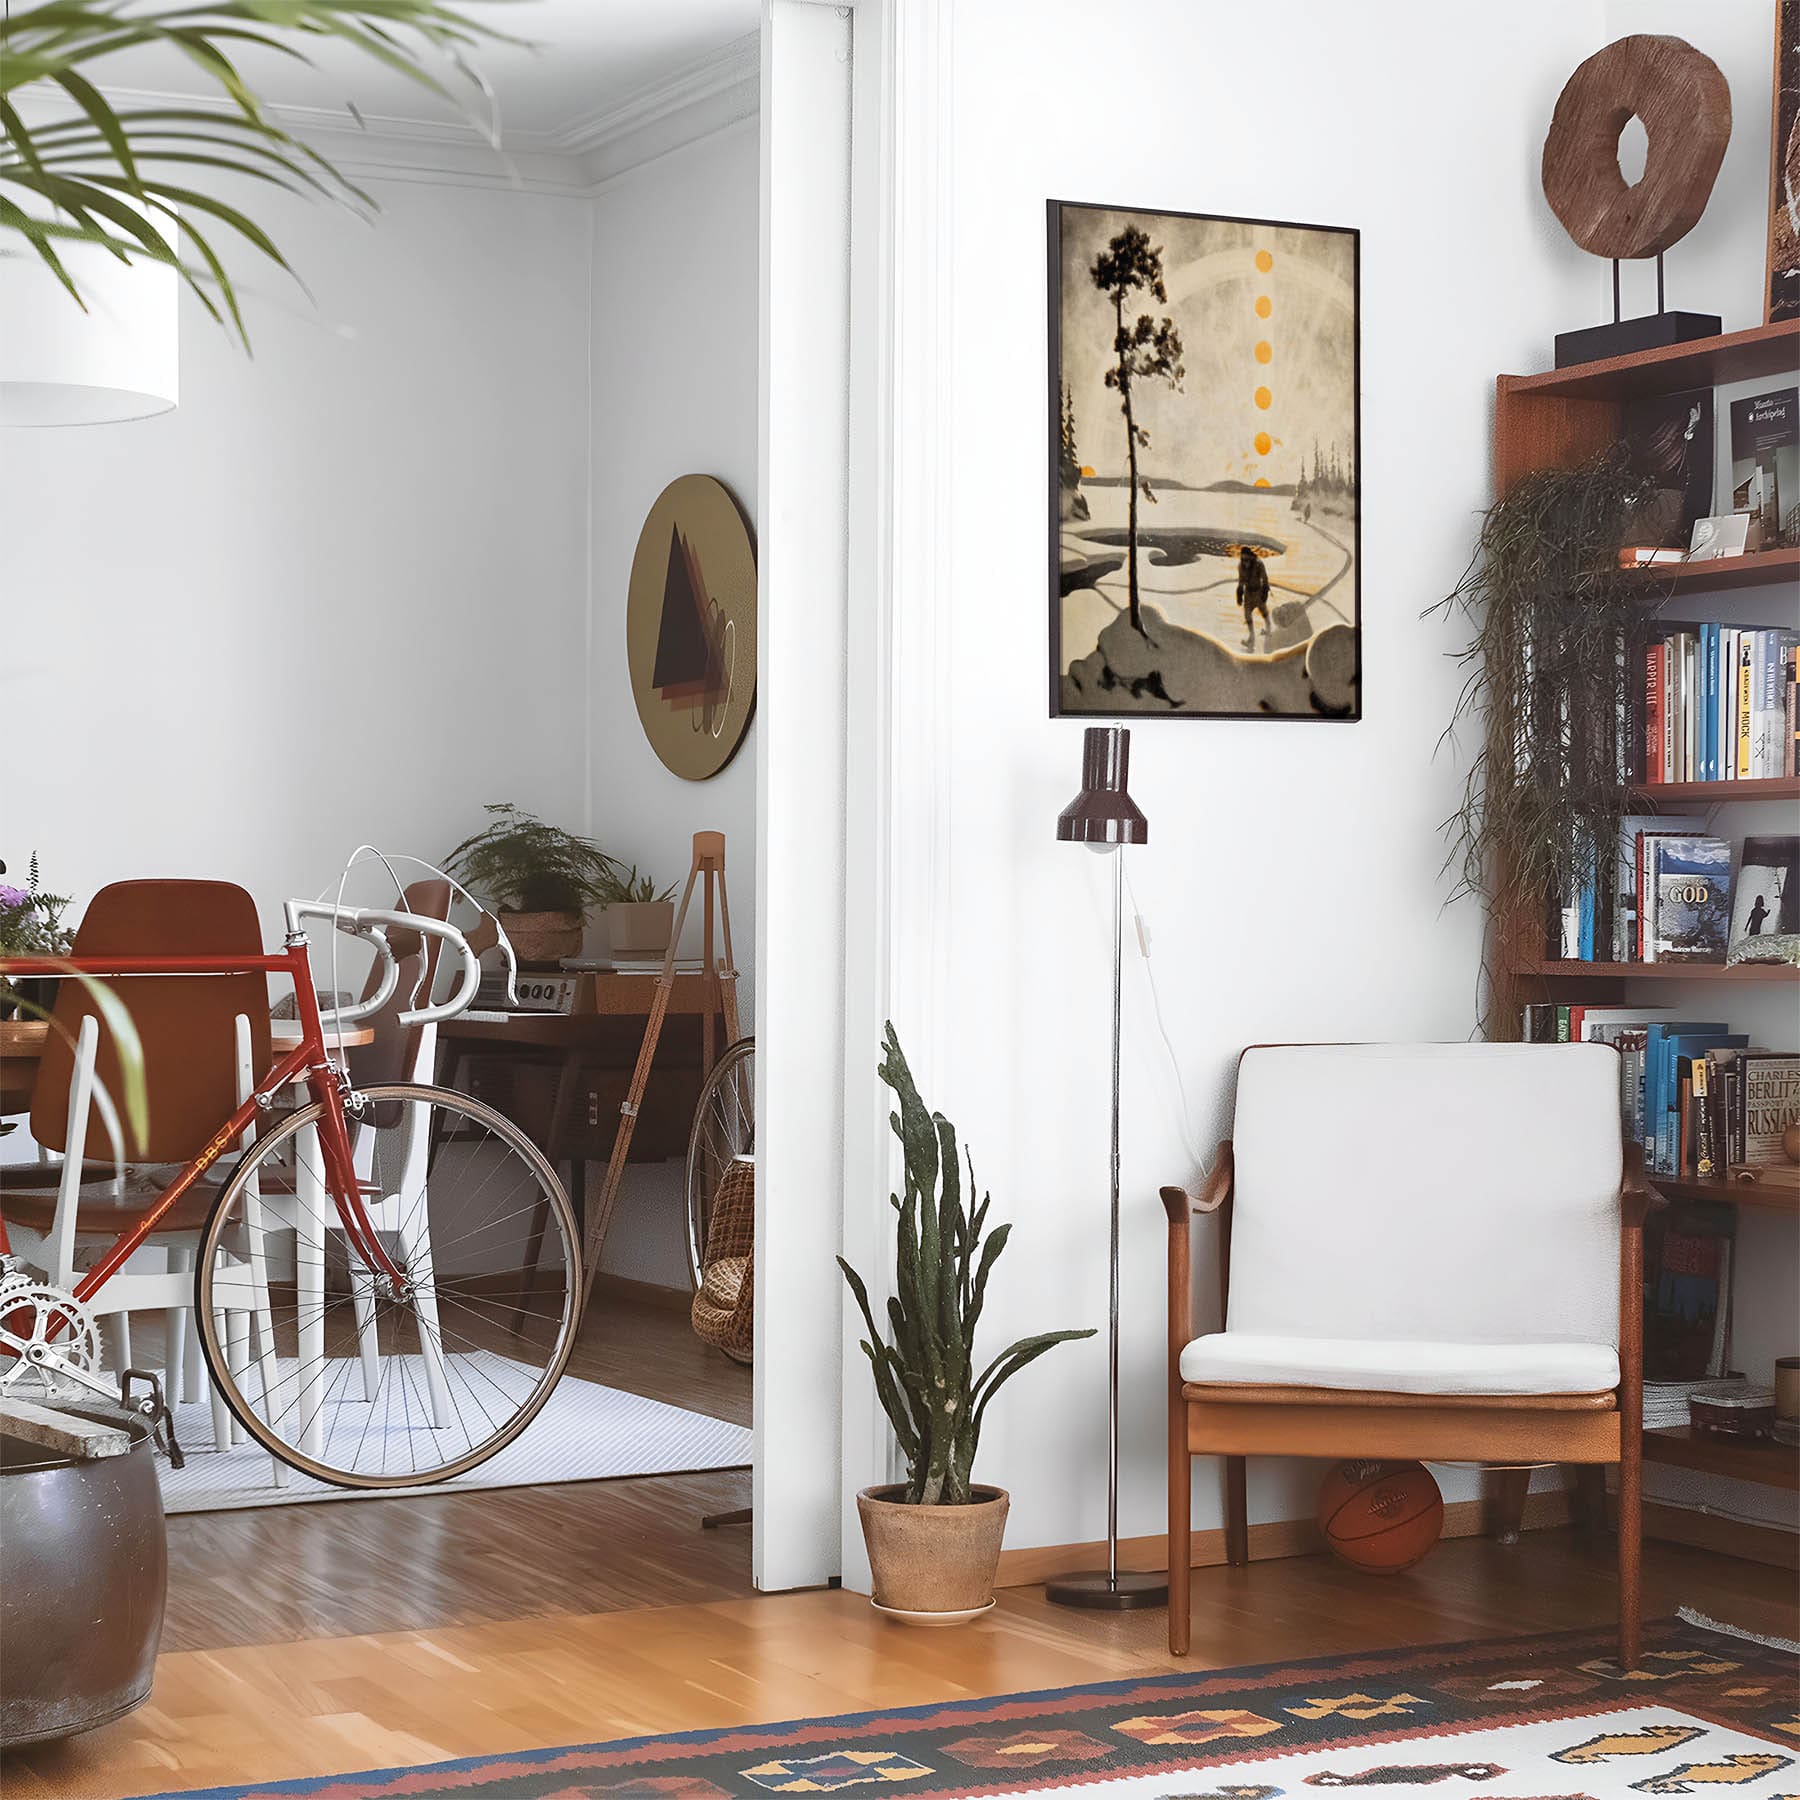 Eclectic living room with a road bike, bookshelf and house plants that features framed artwork of a Snowy Figure and the Sun above a chair and lamp